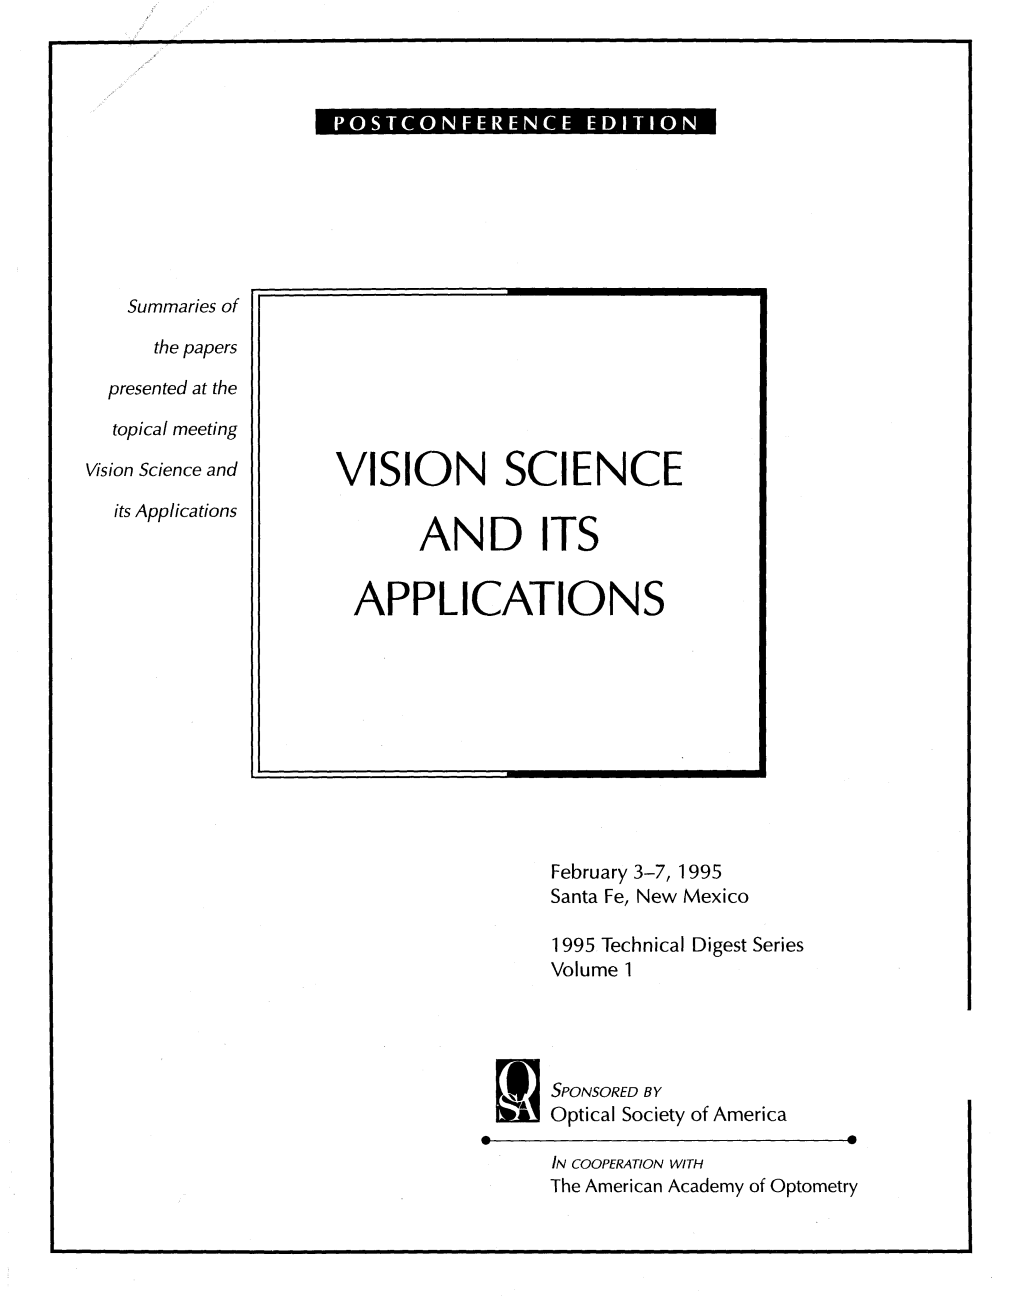 Vision Science and Its Applications